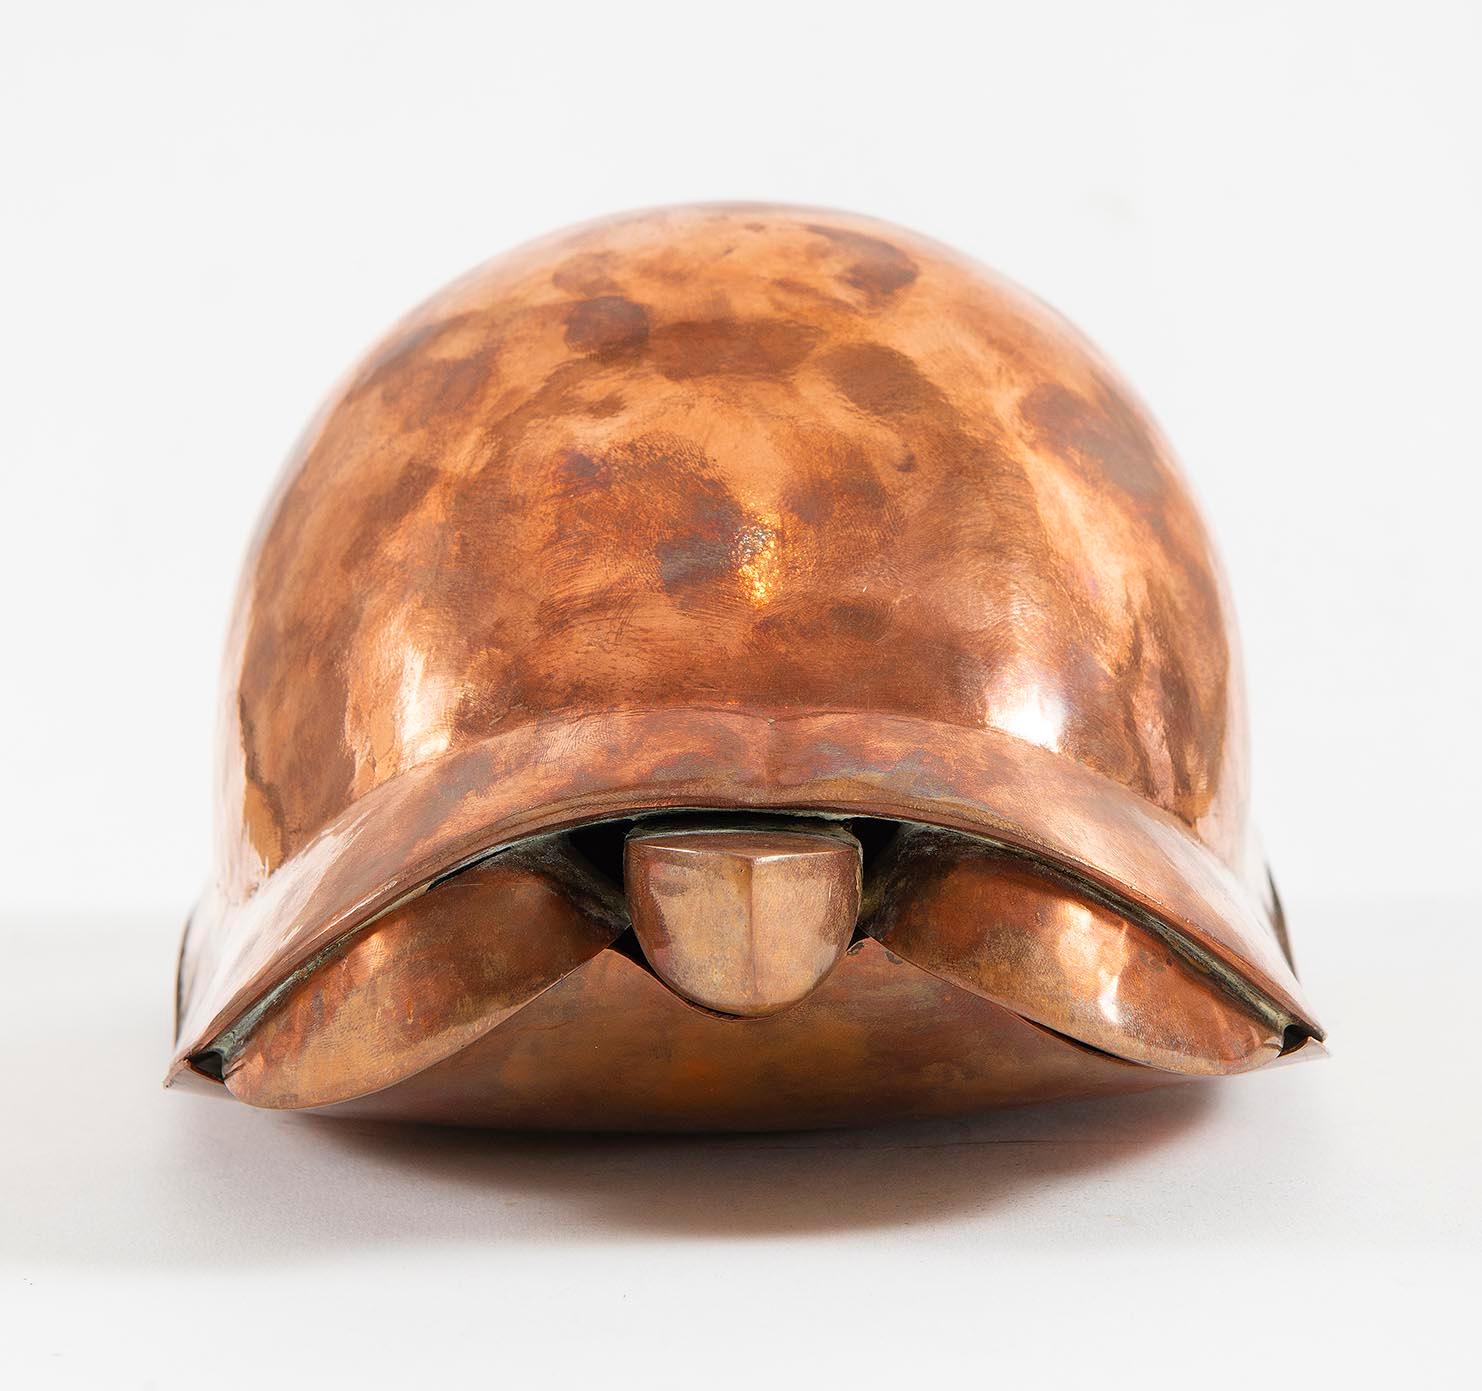 Turtle, by Fx lalanne, Sculpture, Design, Copper, 1970's, ashtray, animal - Print by Francois-Xavier Lalanne